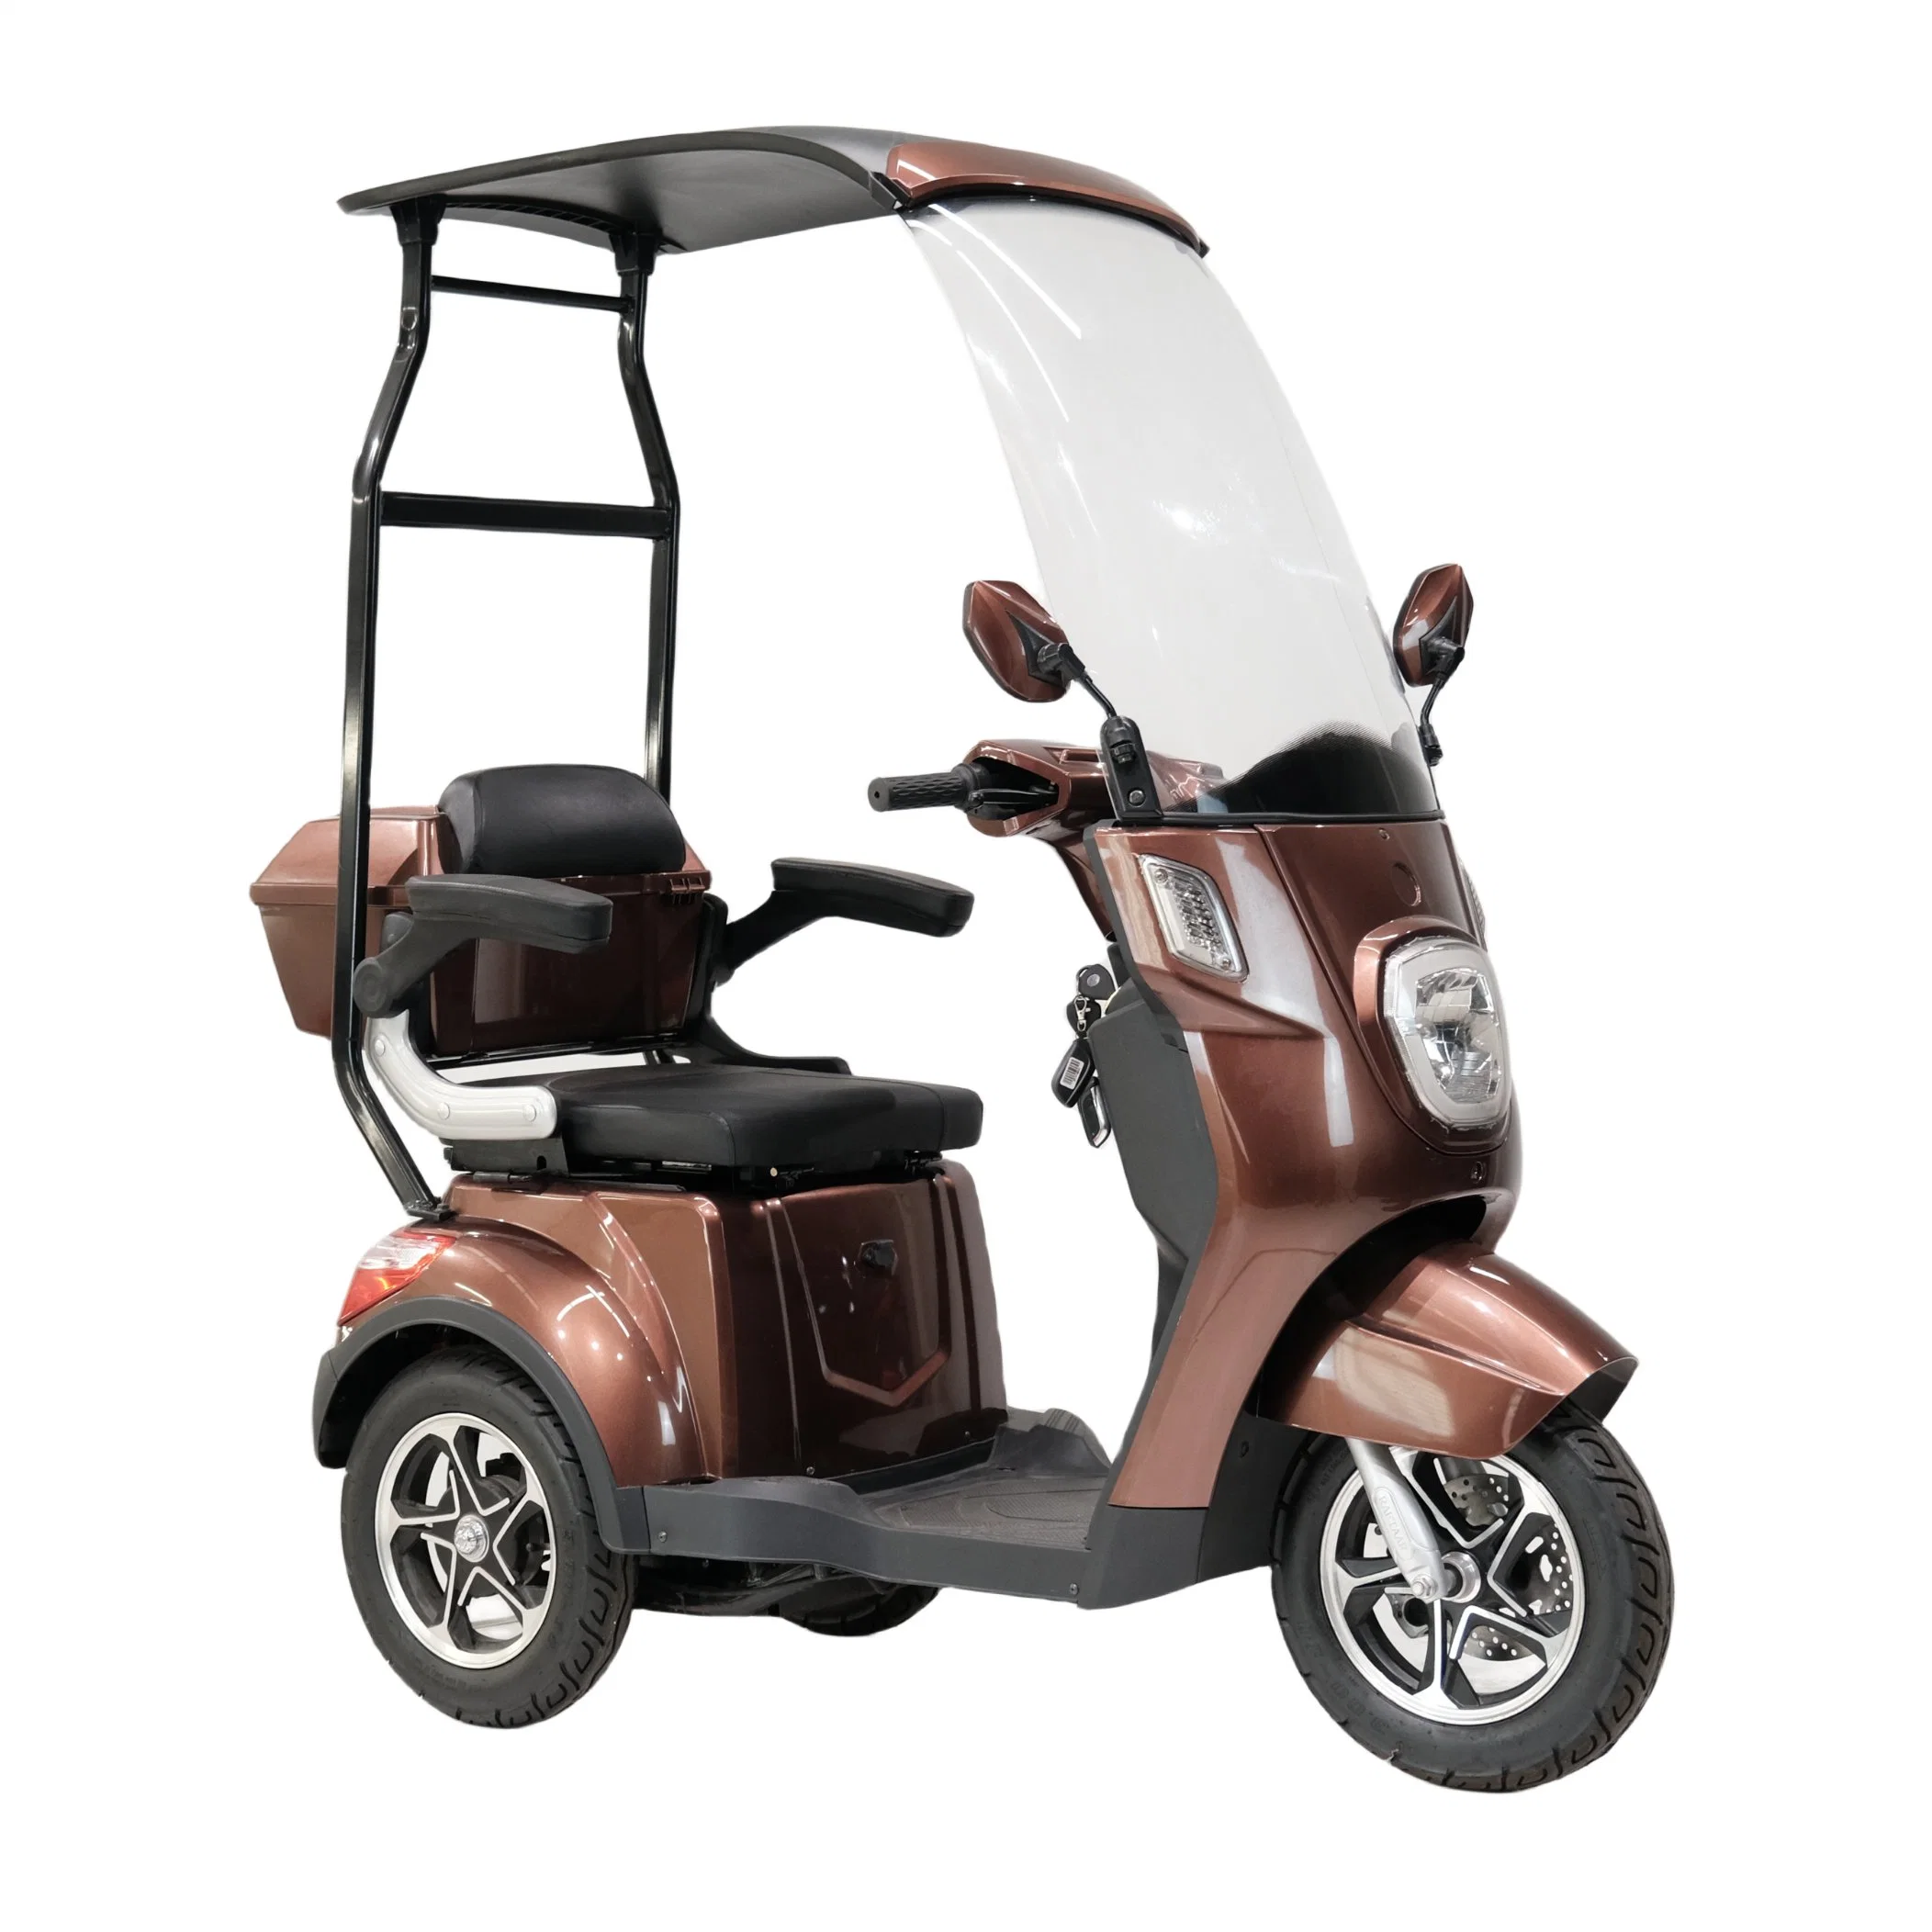 Elderly Mini Electric Three Wheel Motorcycle with Roof 3 Wheel Tricycle for Personal Auto Rickshaw